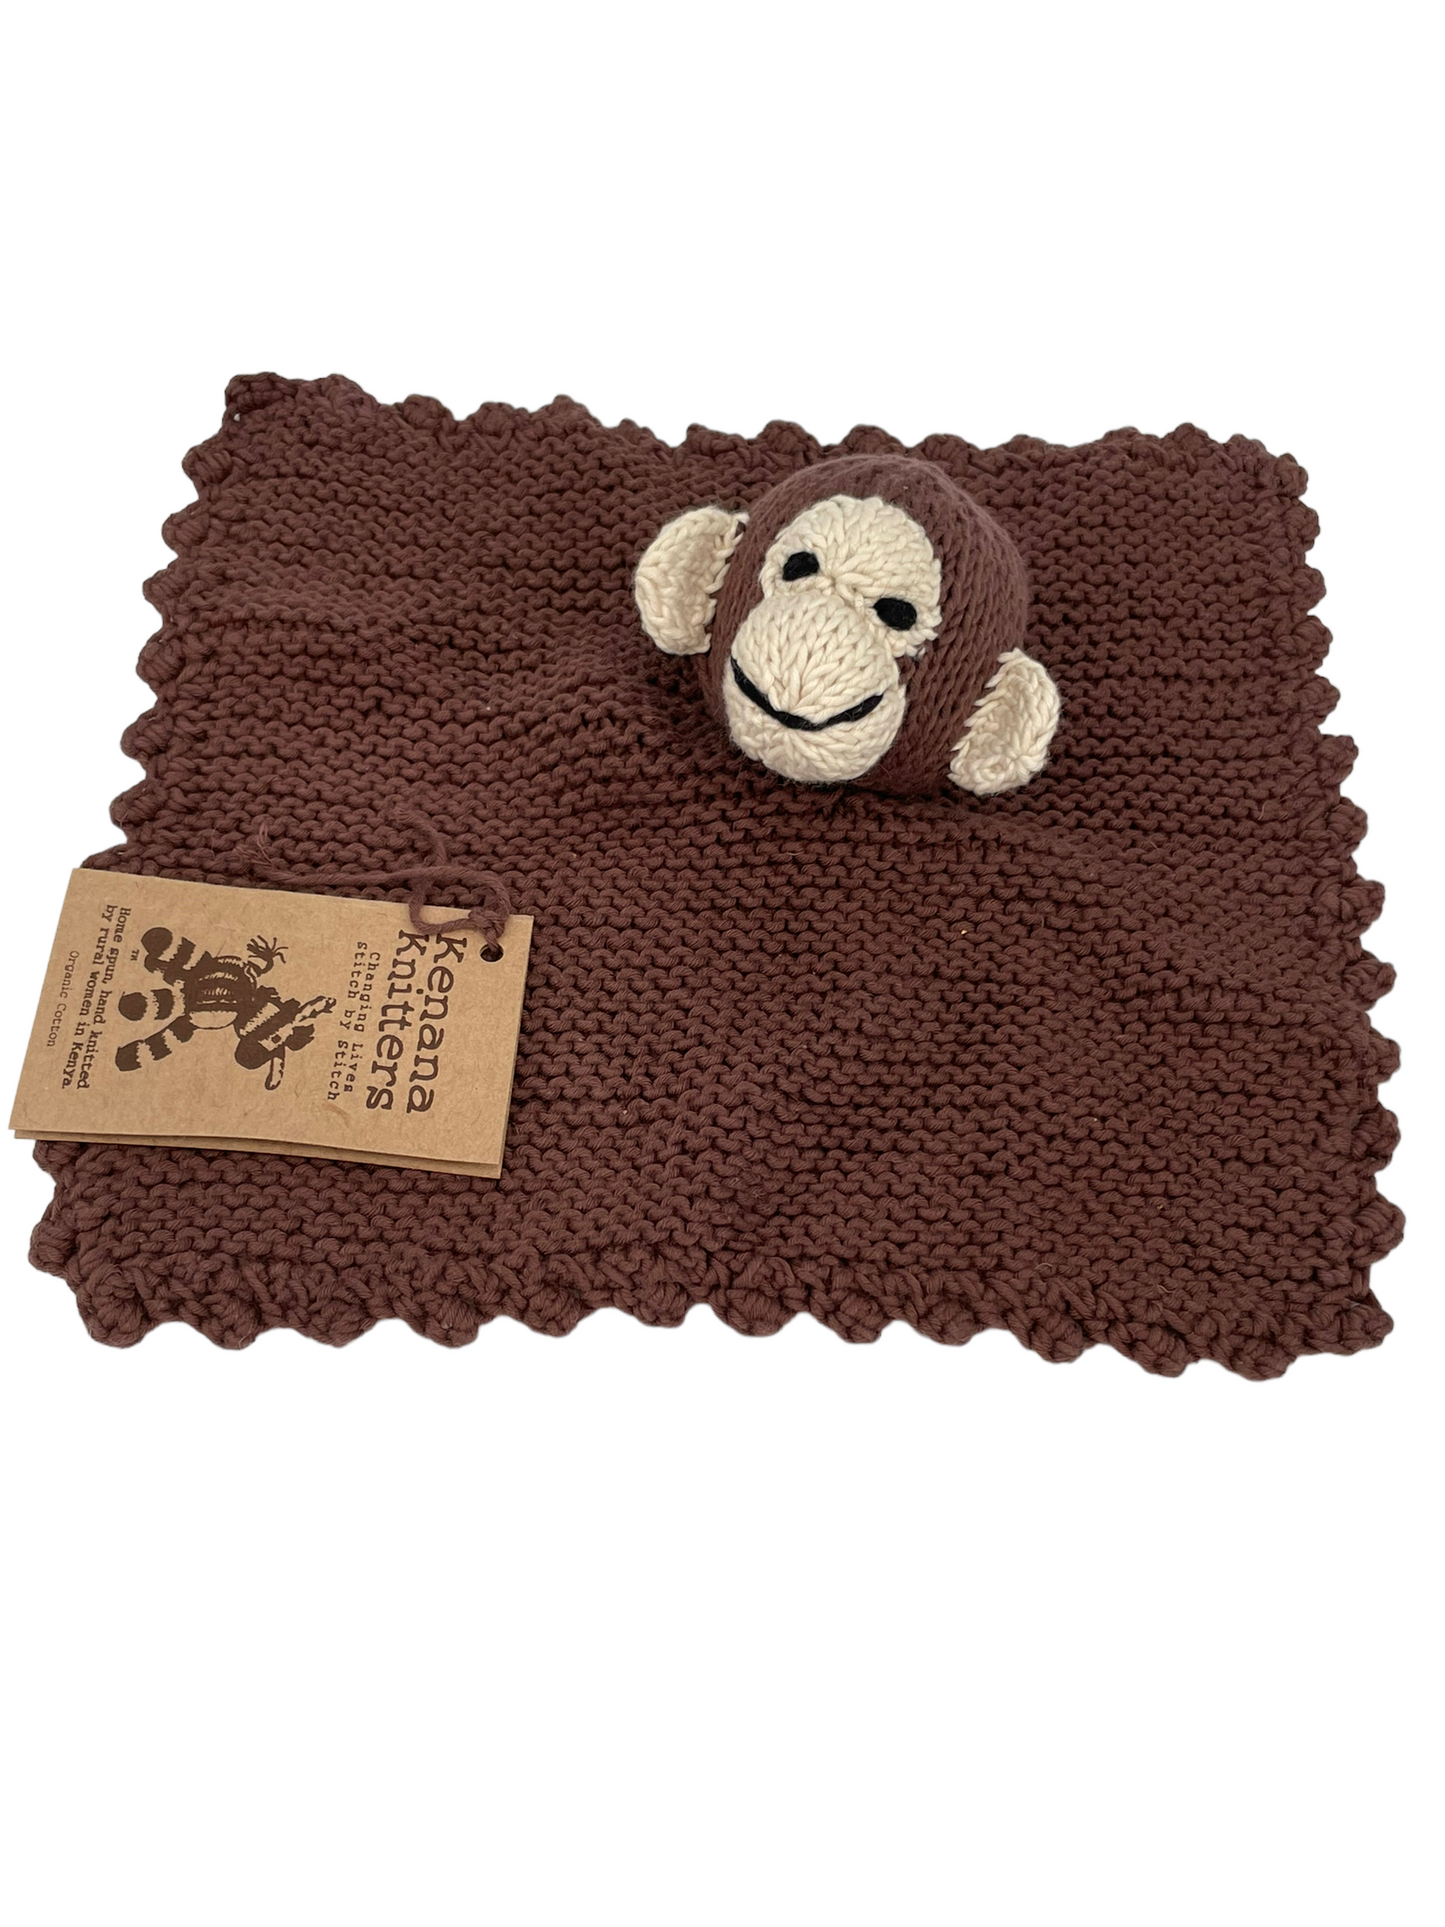 Monkey comforter in eco-responsible organic cotton certified GOTS - MARCEL - Kenana Knitters